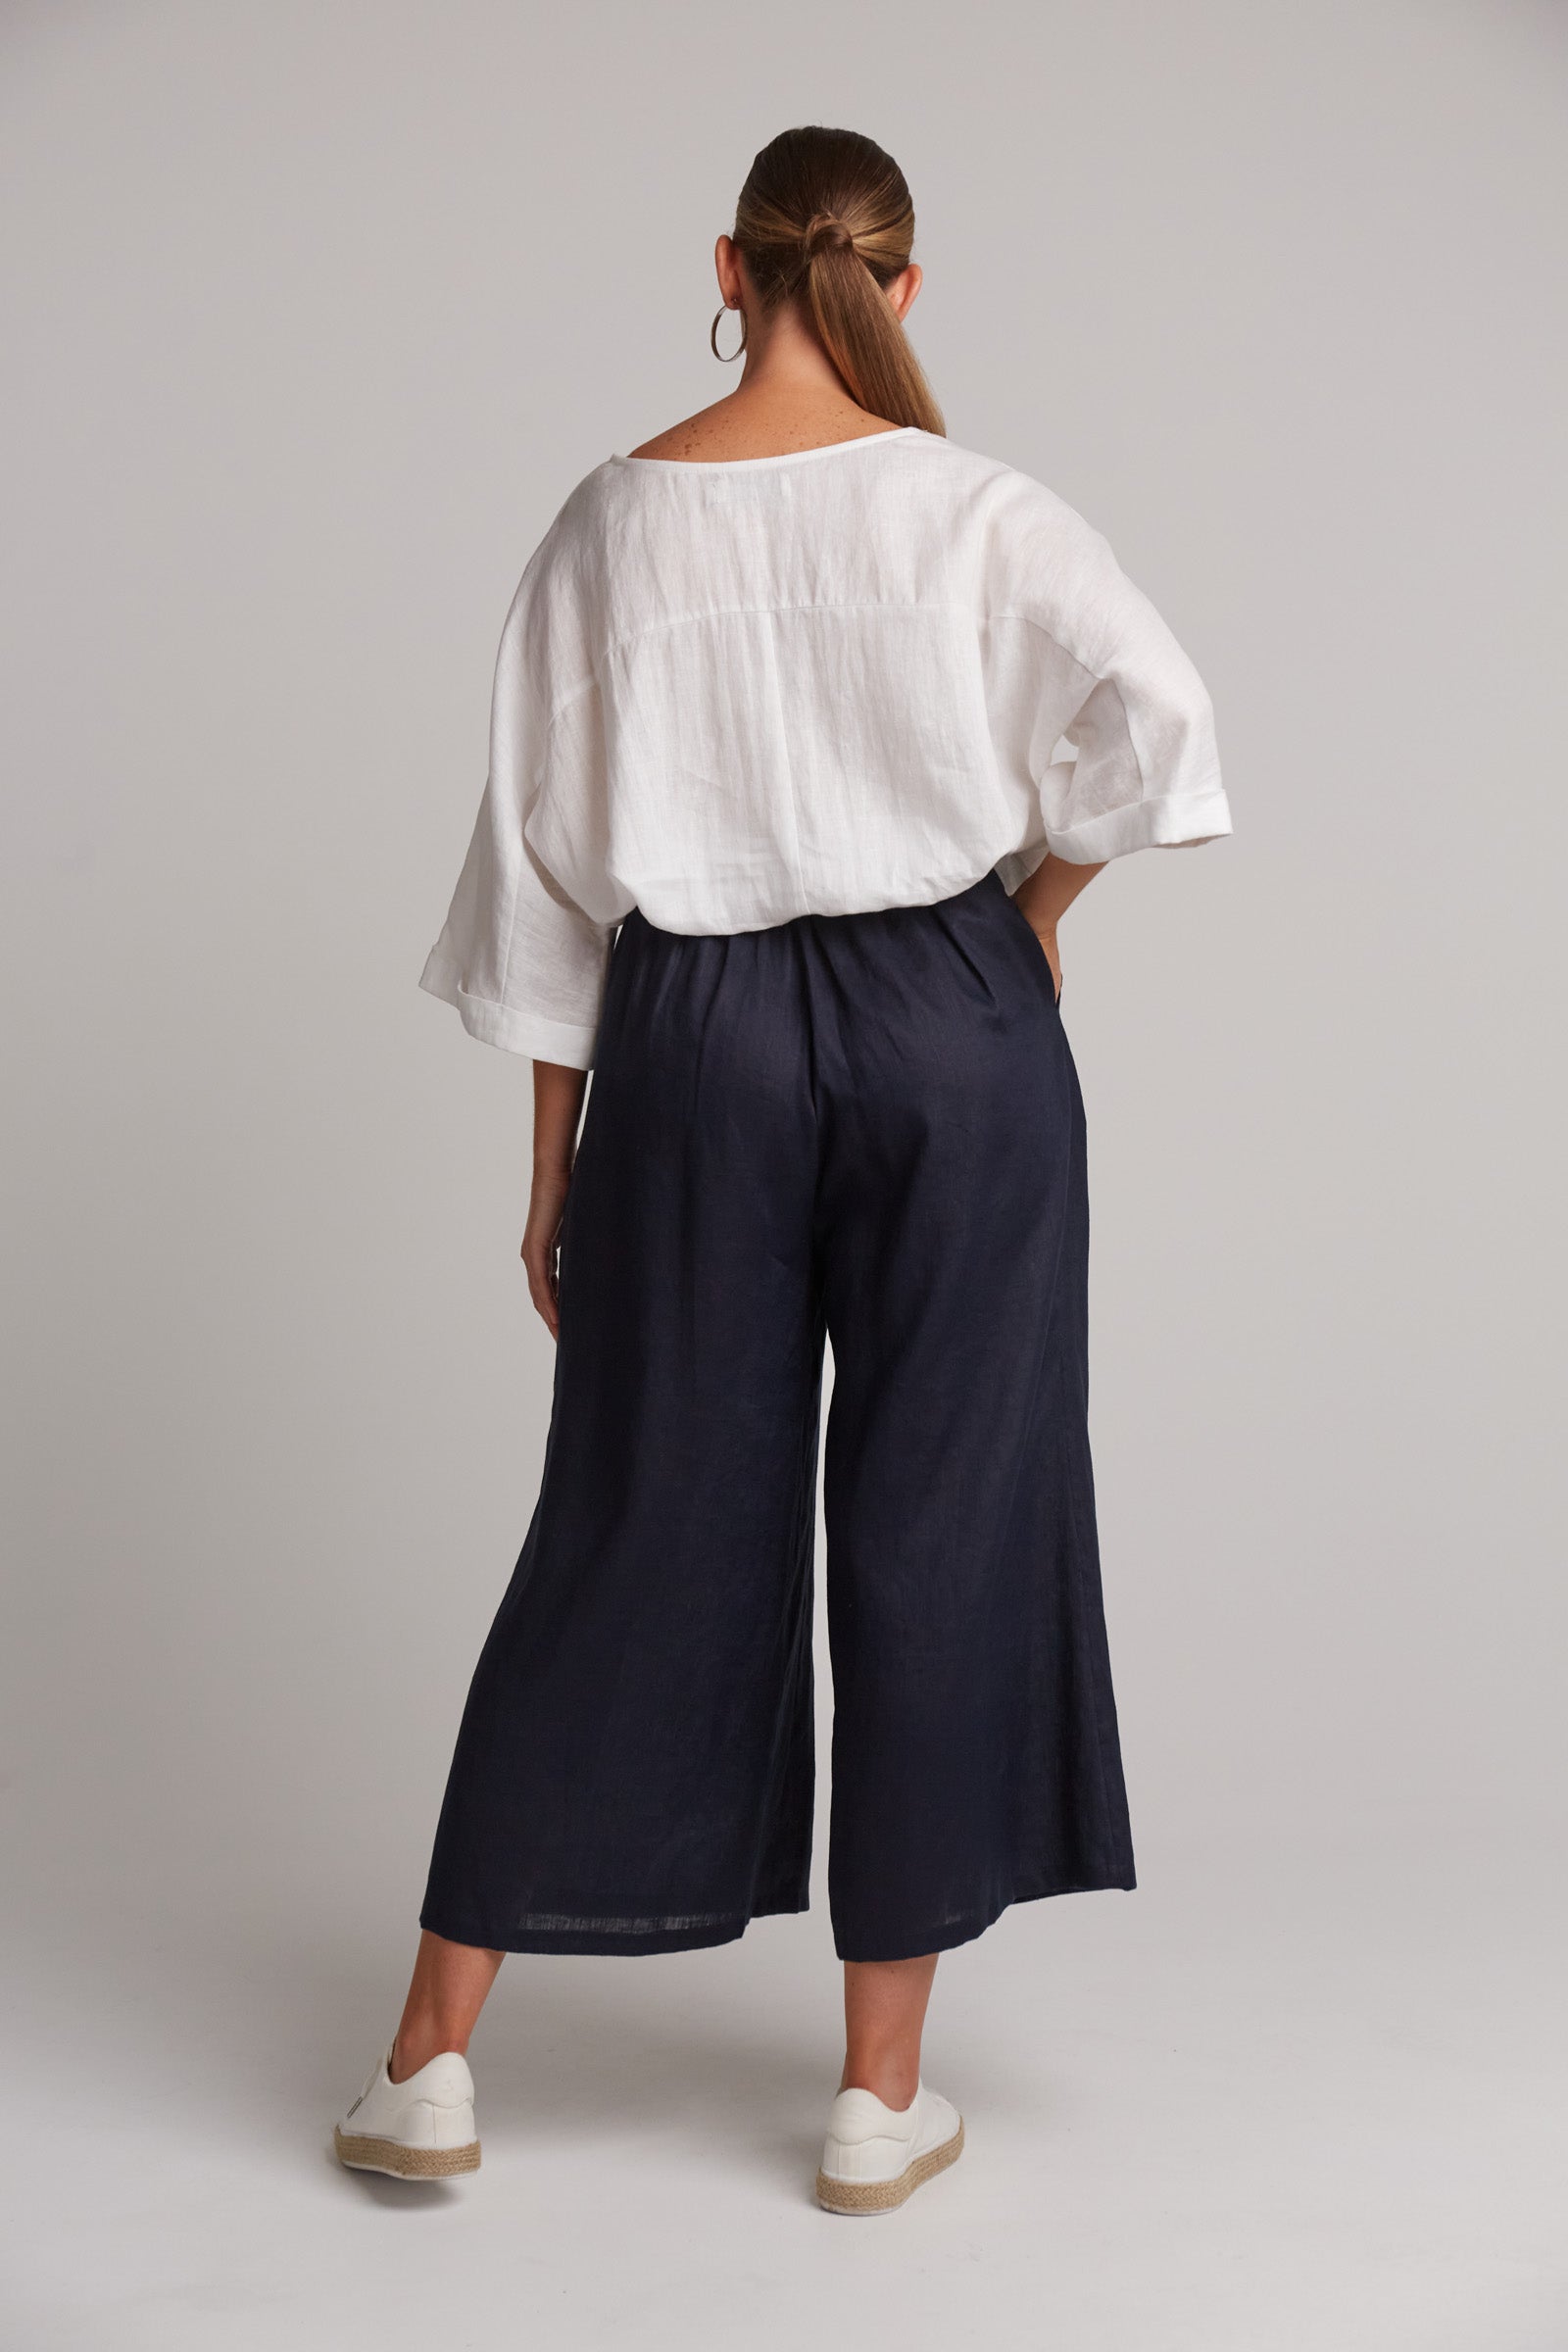 Studio Crop Pant - Navy - eb&ive Clothing - Pant Relaxed Crop Linen